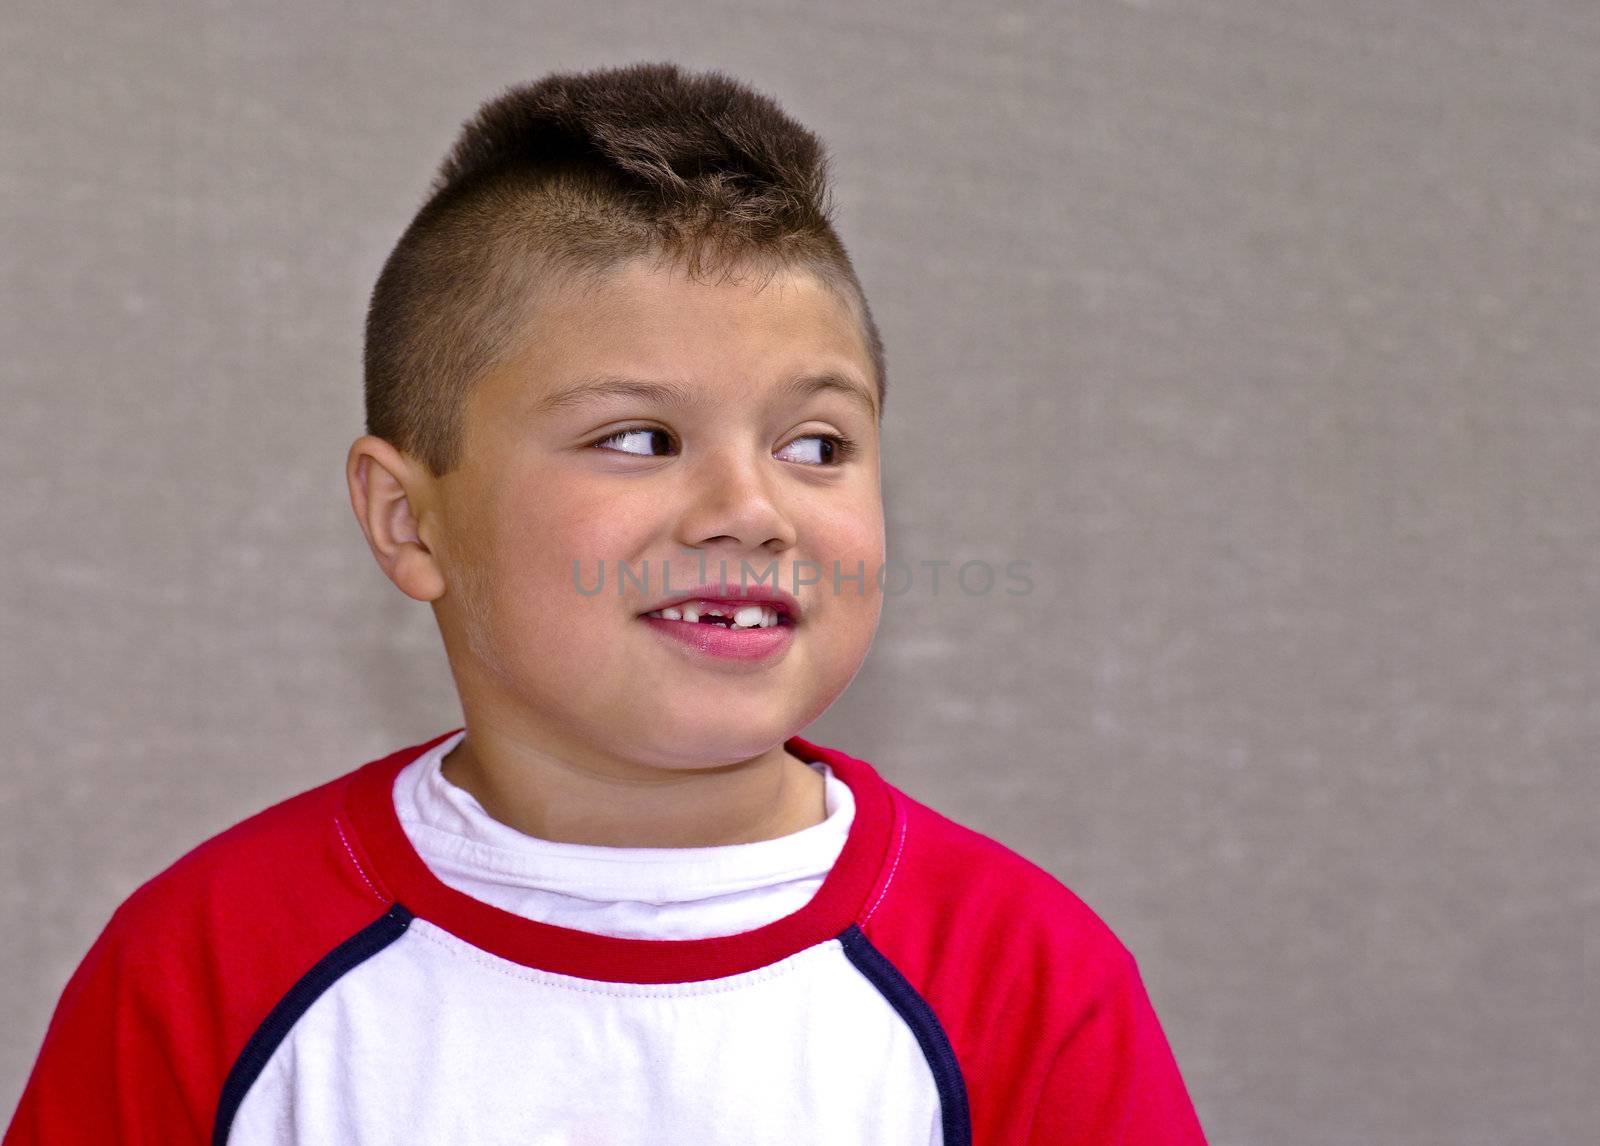 Young native boy with missing tooth looking sideways mischeviously.